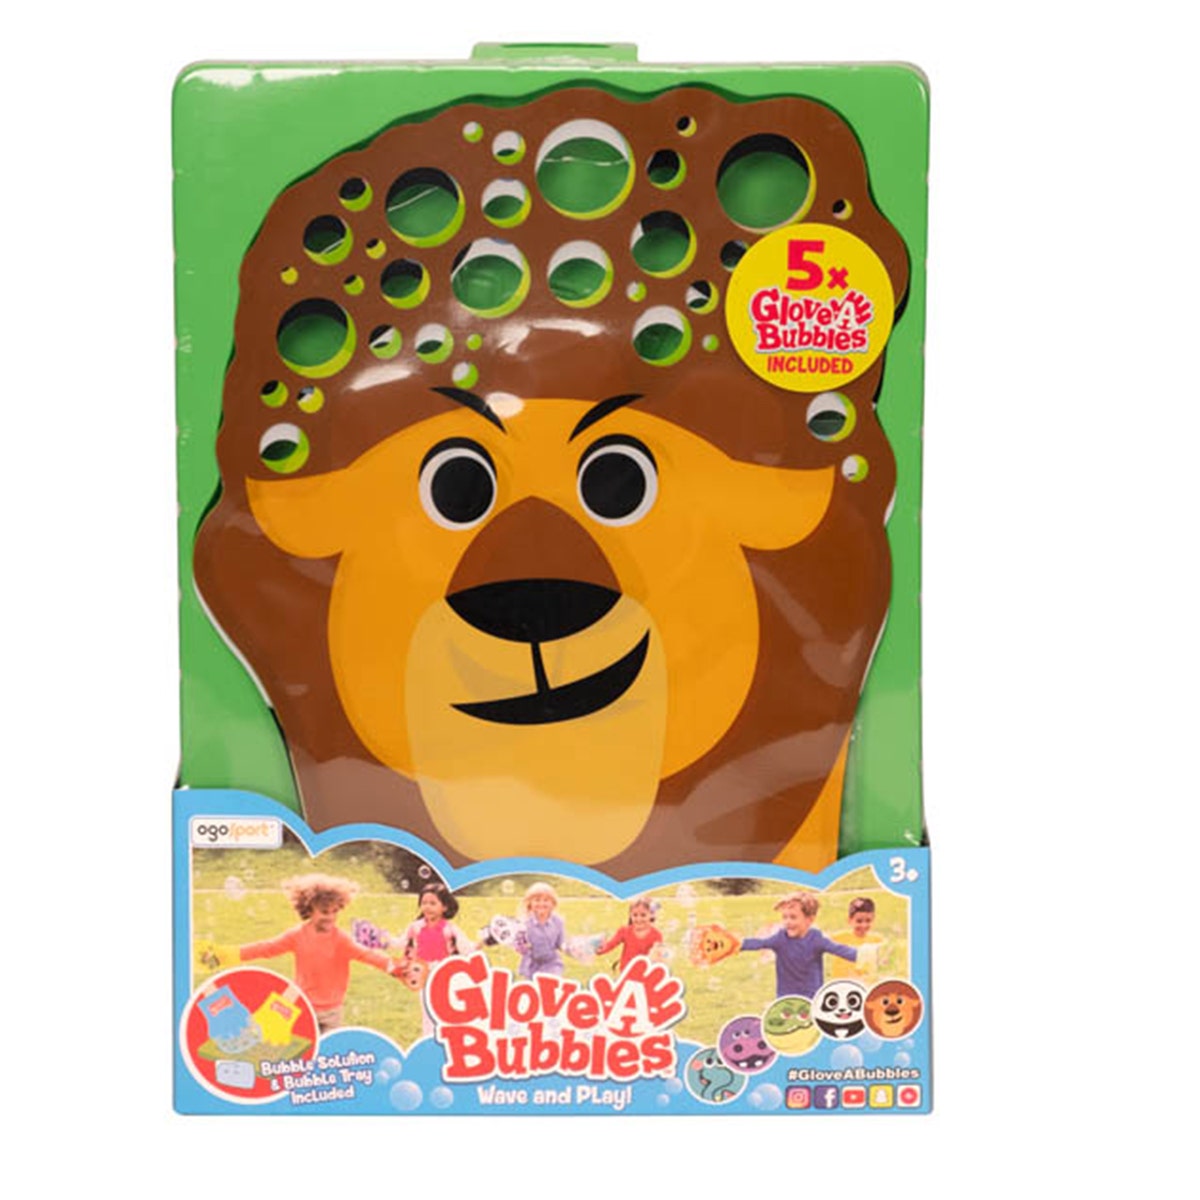 5pk Glove-A-Bubbles with Solution & Dip Tray - Wave & Play!